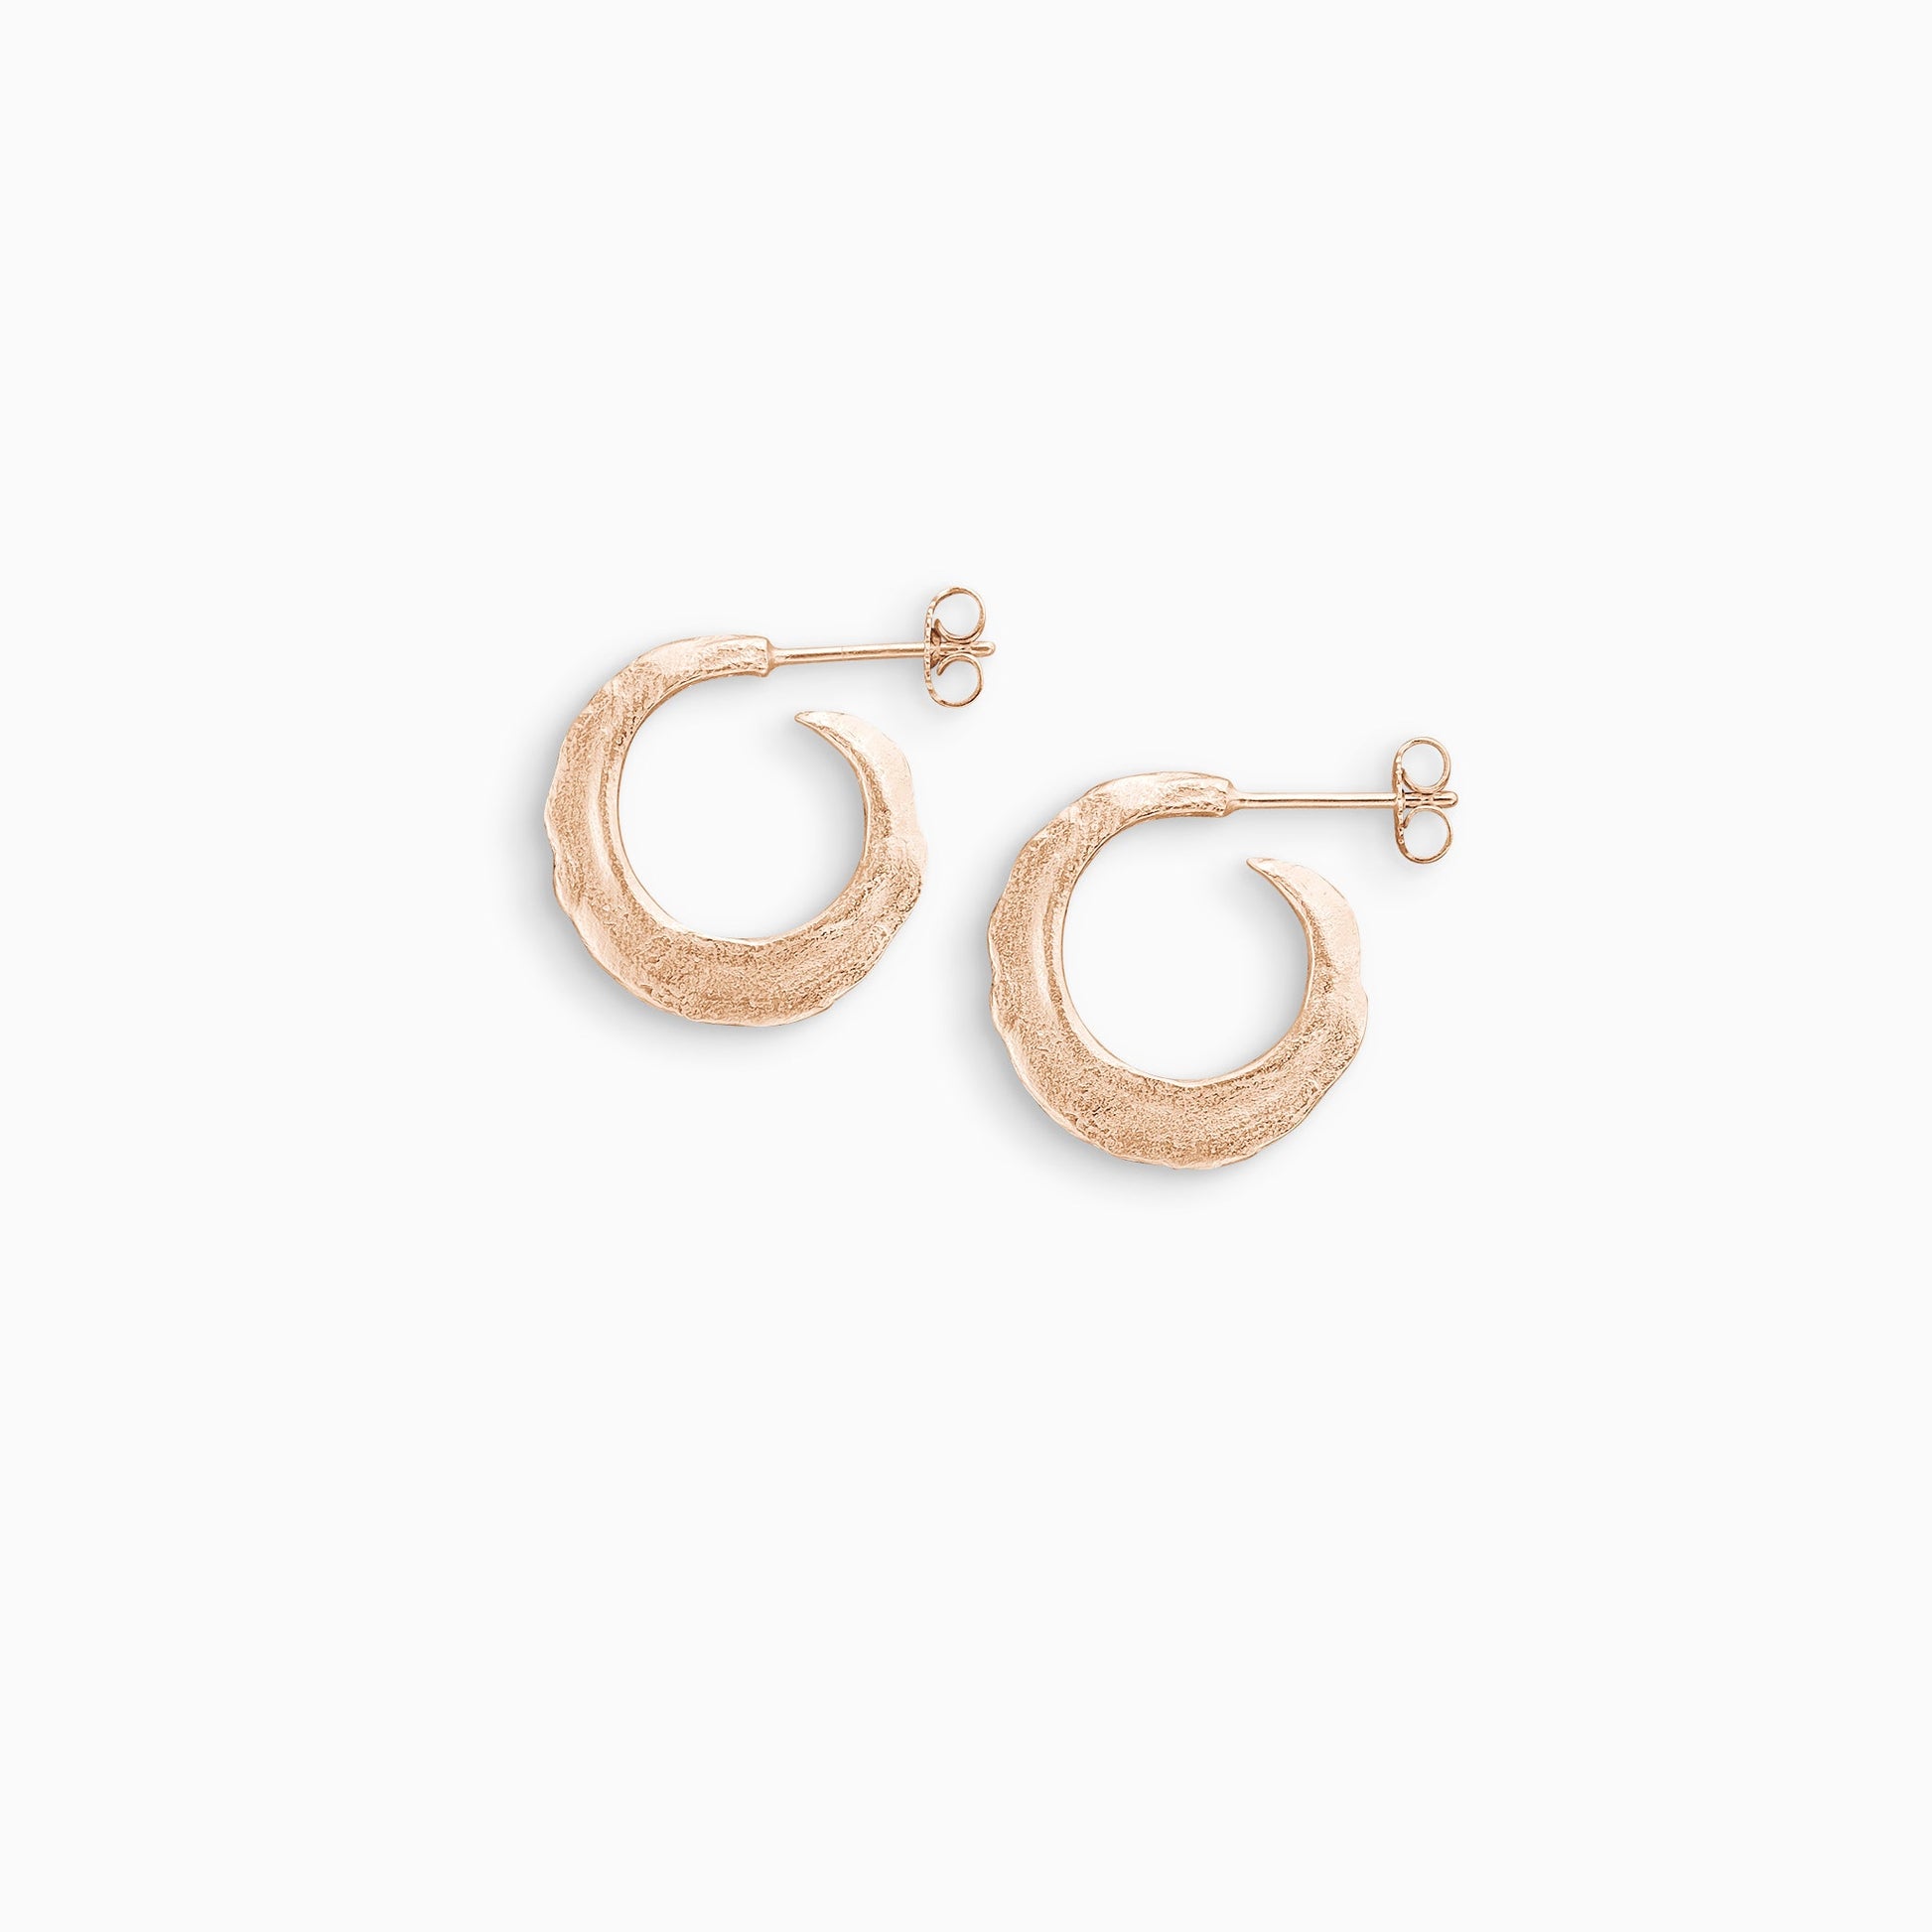 A pair of 18ct Fairtrade rose gold  round hoop earrings with a stud fastening. Organic texture and and tapering from bottom centre to the top. 22mm outside diameter.